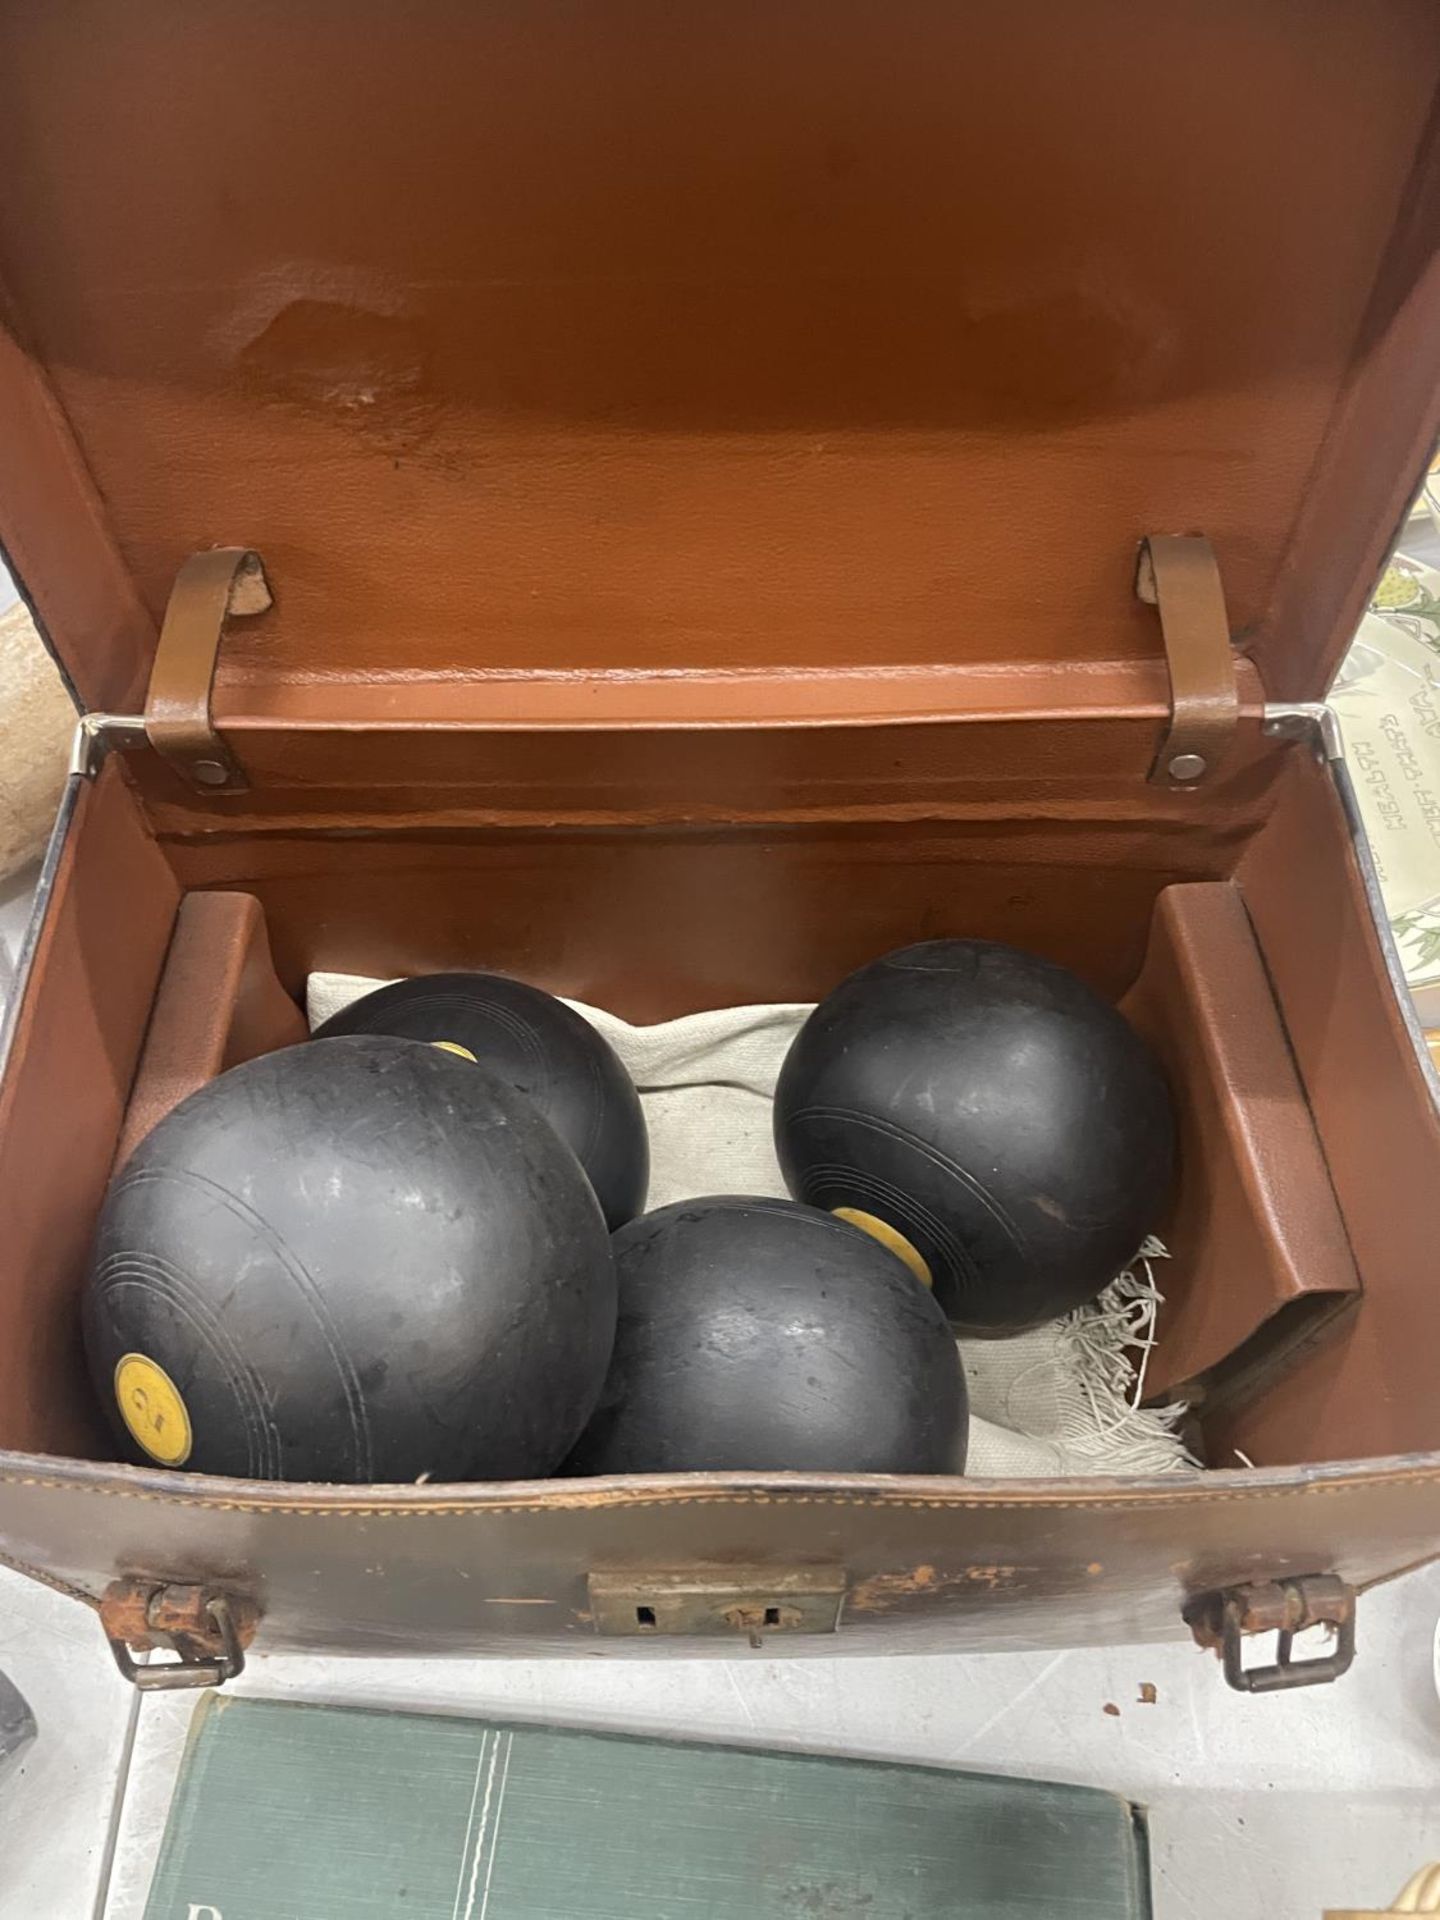 FOUR IDENTICAL BOWLING BOWLS, NUMBERED 1, 2, 3 AND 4 IN A VINTAGE LEATHER CASE - Image 2 of 3